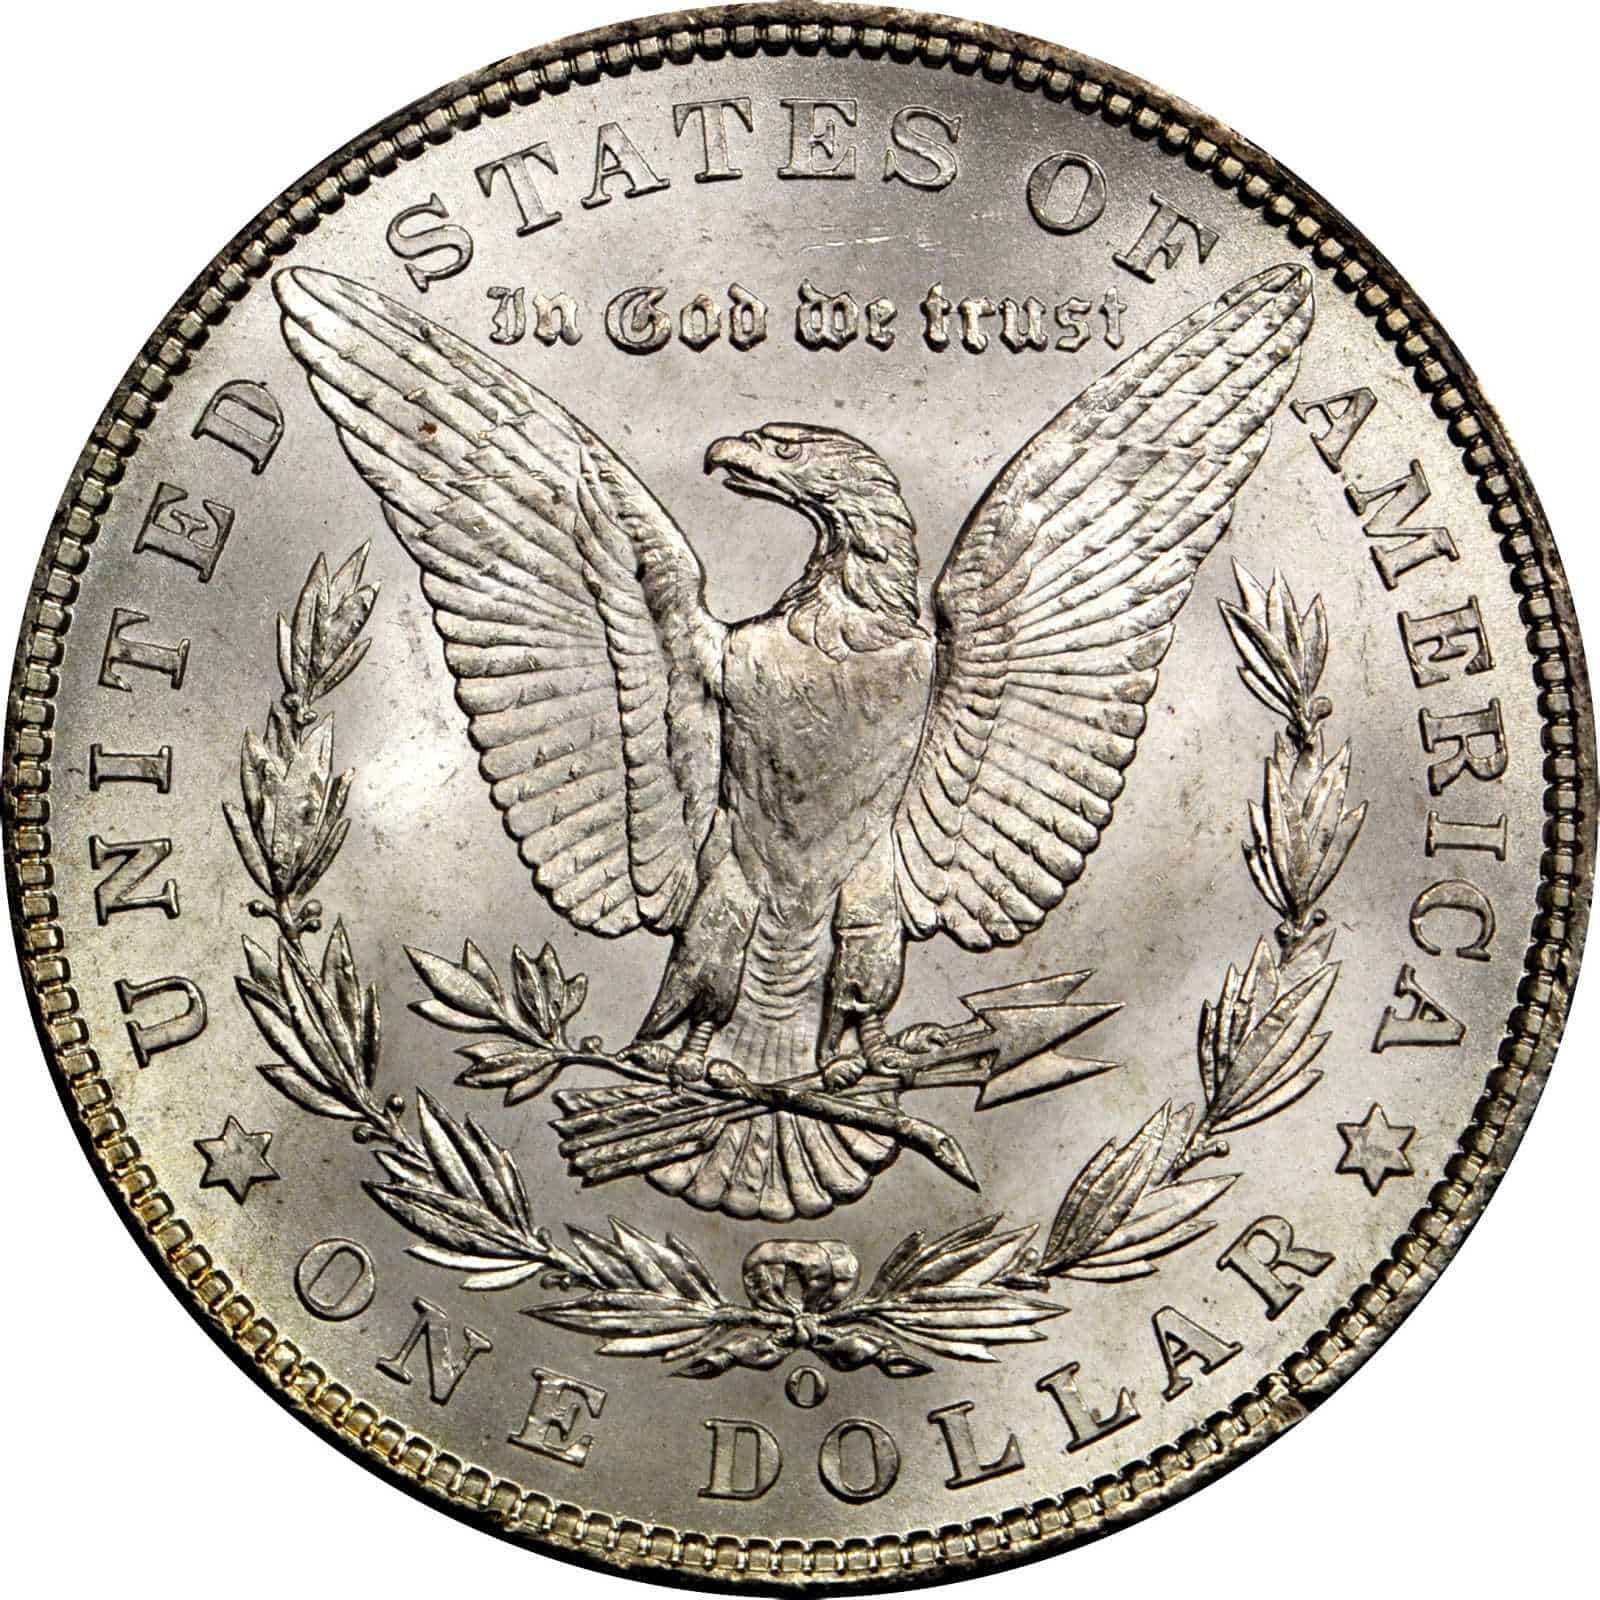 The Reverse of the 1901 Silver Dollar